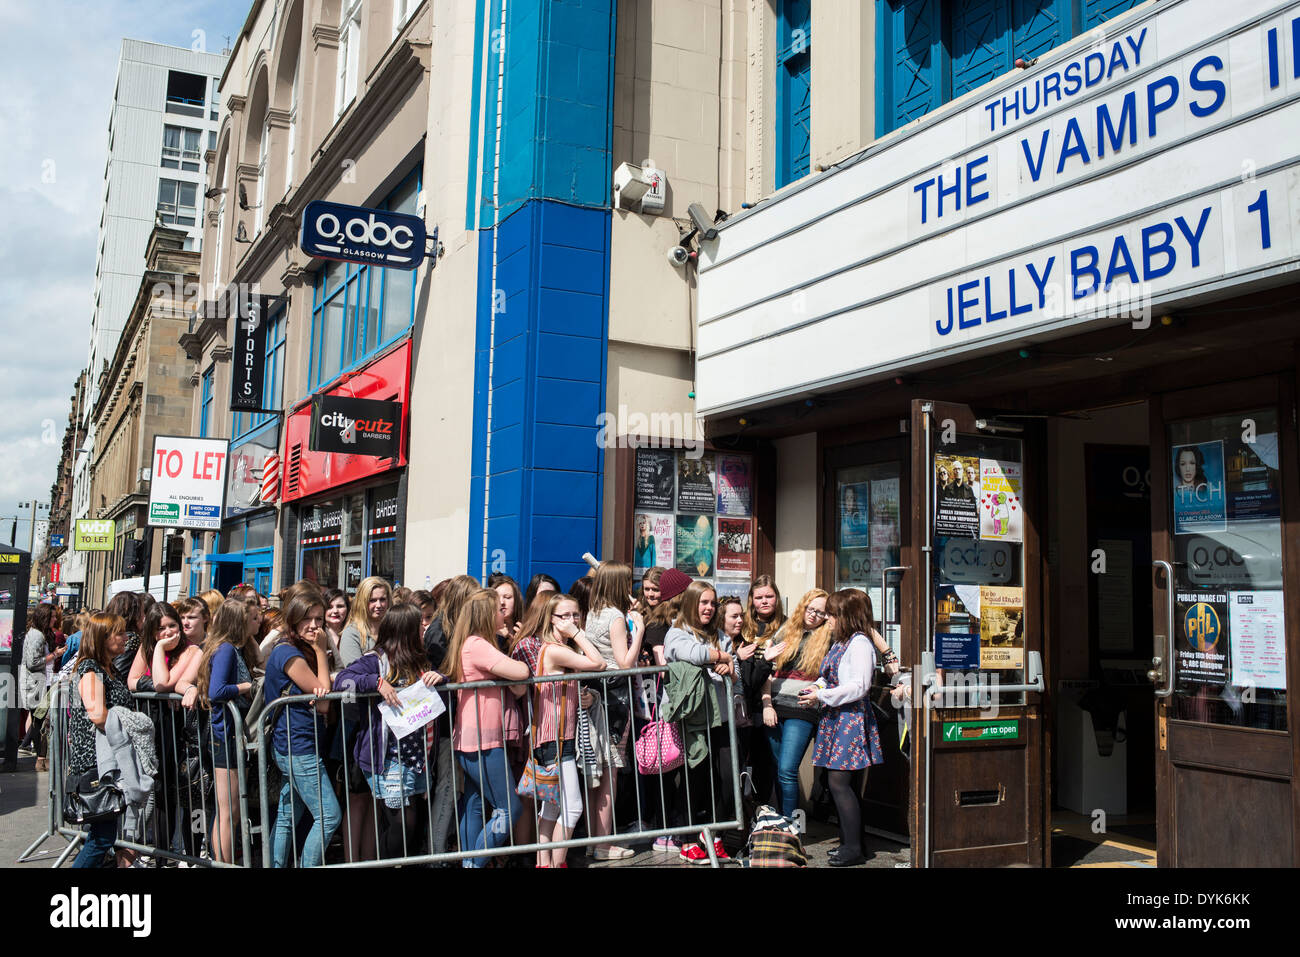 Teenage girls line up for a boy band performance, Glasgow Stock Photo